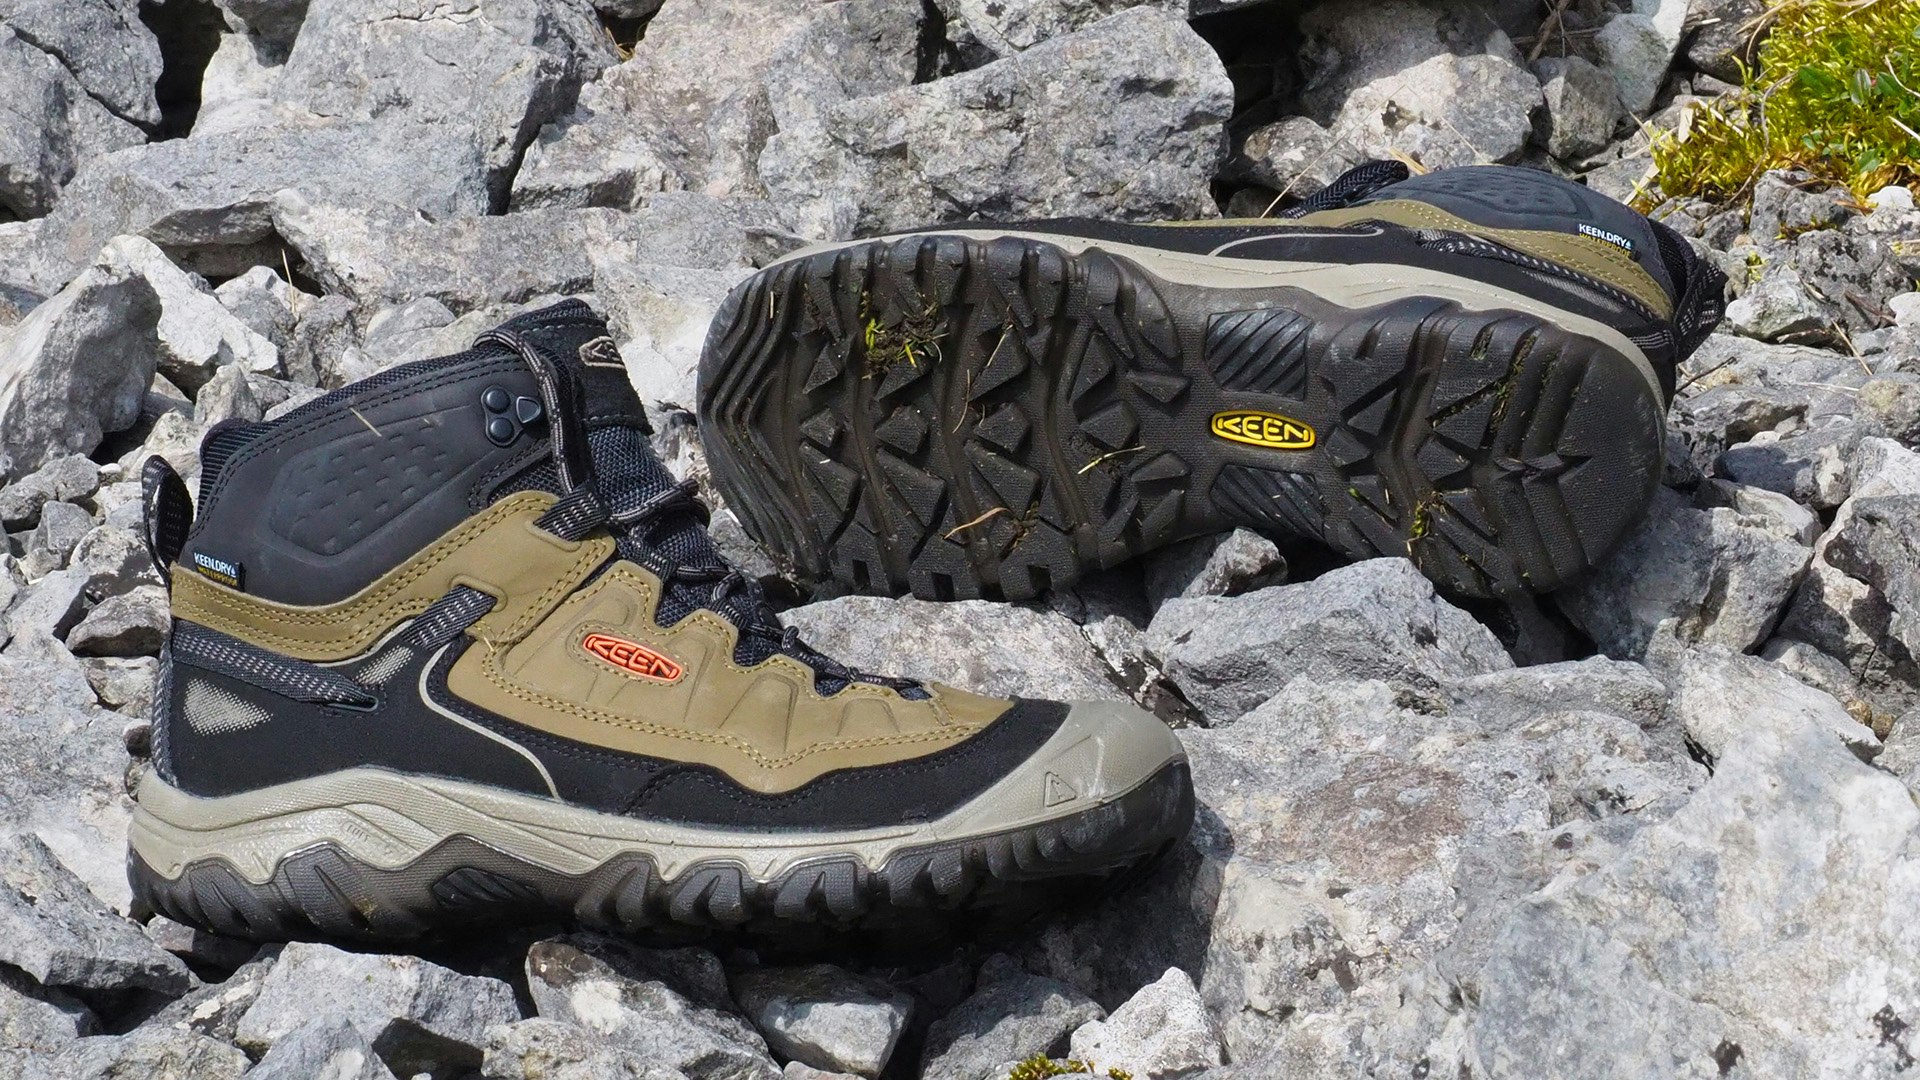 Pair of KEEN Targhee IV boots showing side profile and sole